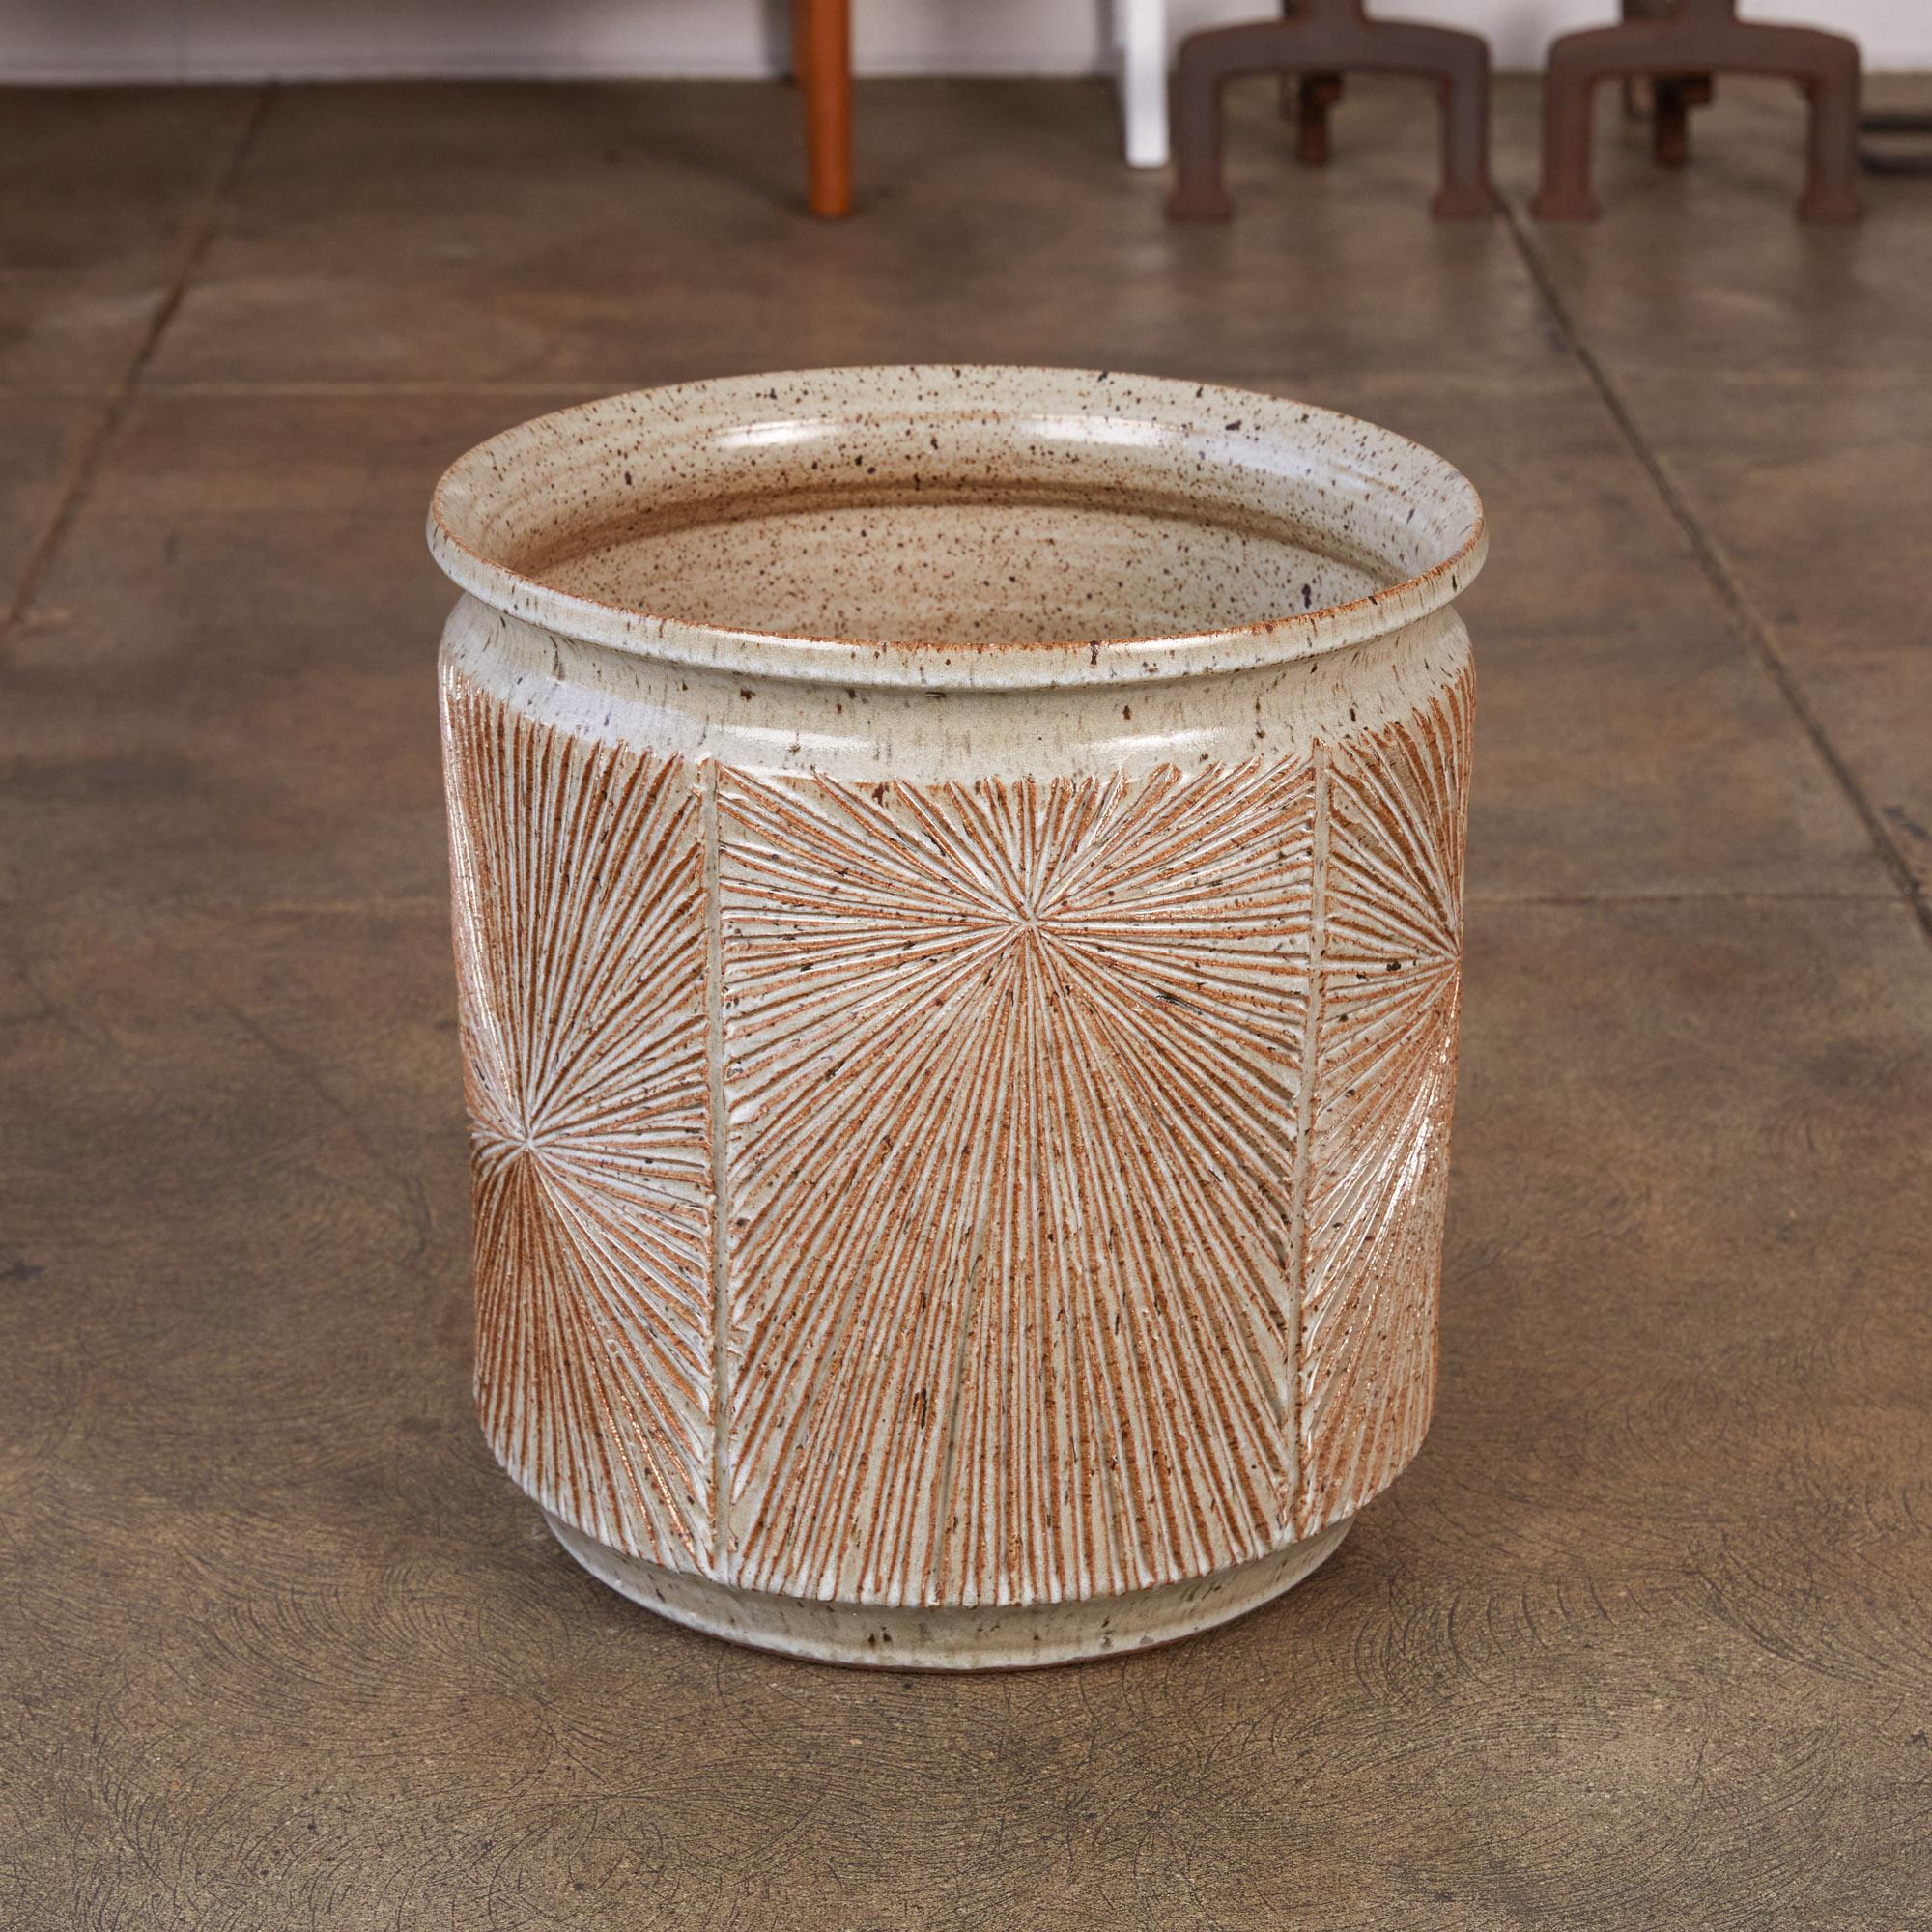 A very rare handmade studio planter from Earthgender, David Cressey and Robert Maxwell’s early 1970s project. This planter has been wheel thrown by hand, not slip cast like the regular production Earthgender pieces, making it a very rare example. It